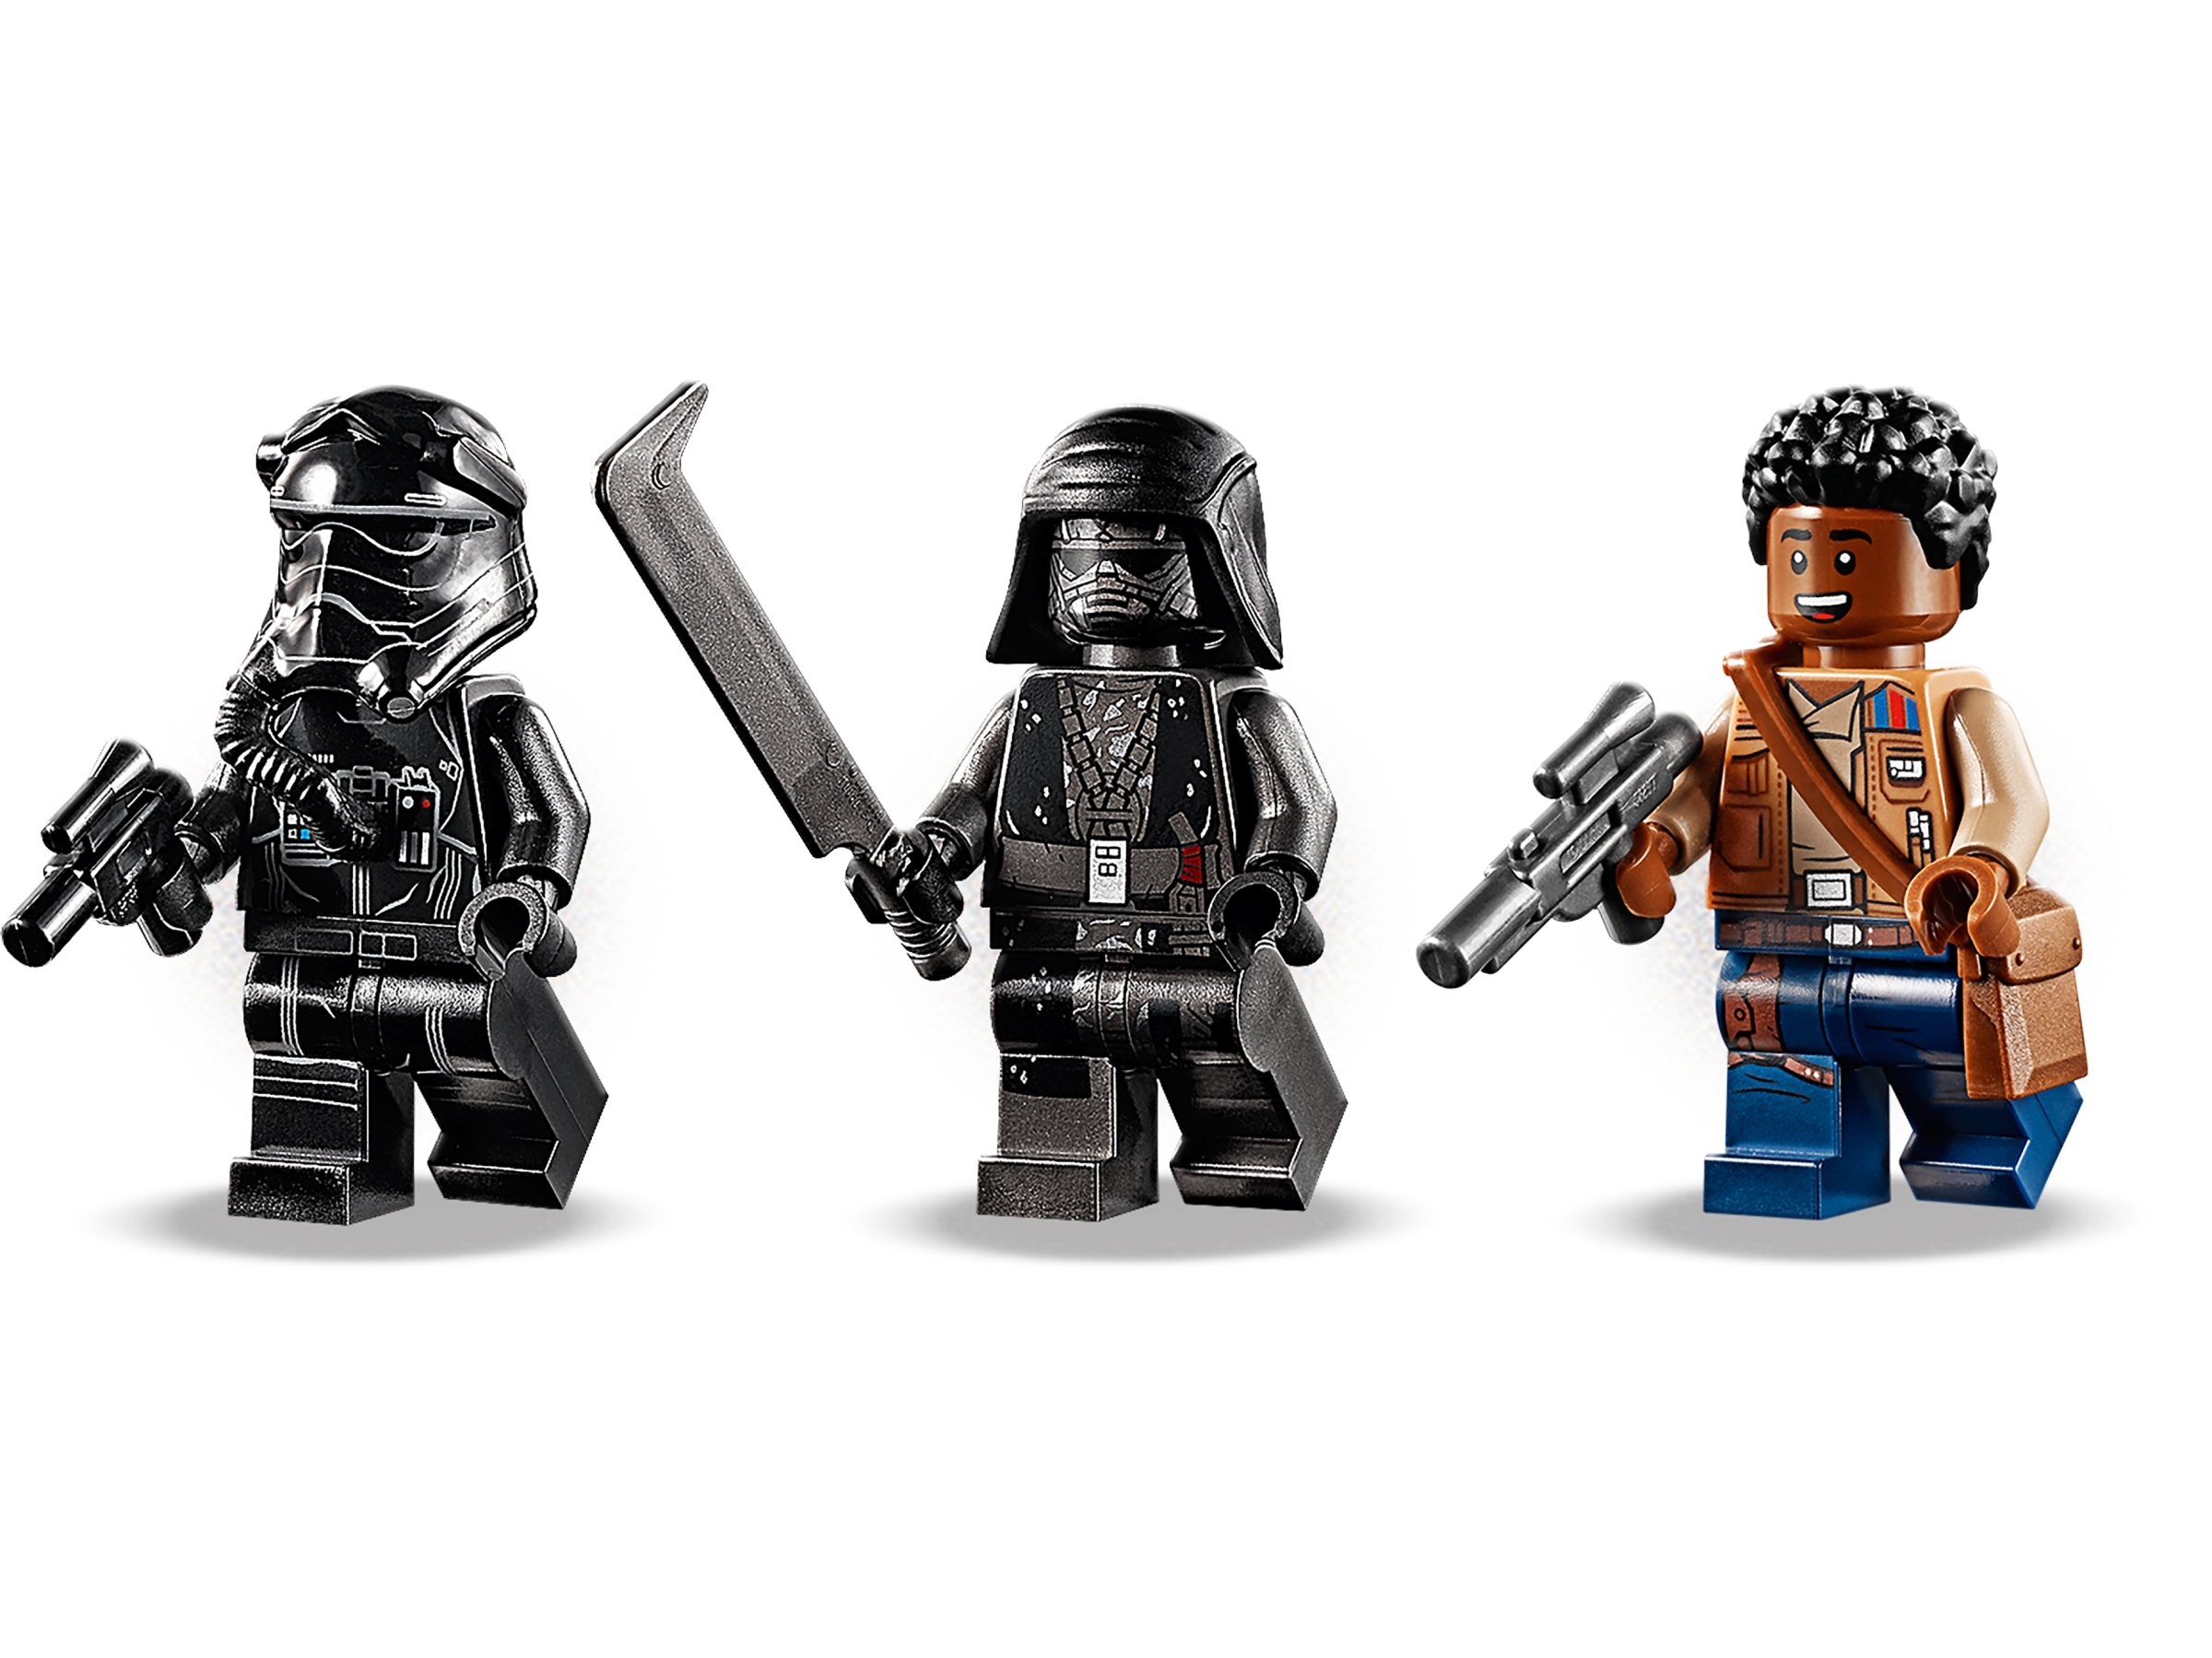 Sith Fighter™ 75272 | Star Wars™ | Buy online at the LEGO® Shop US